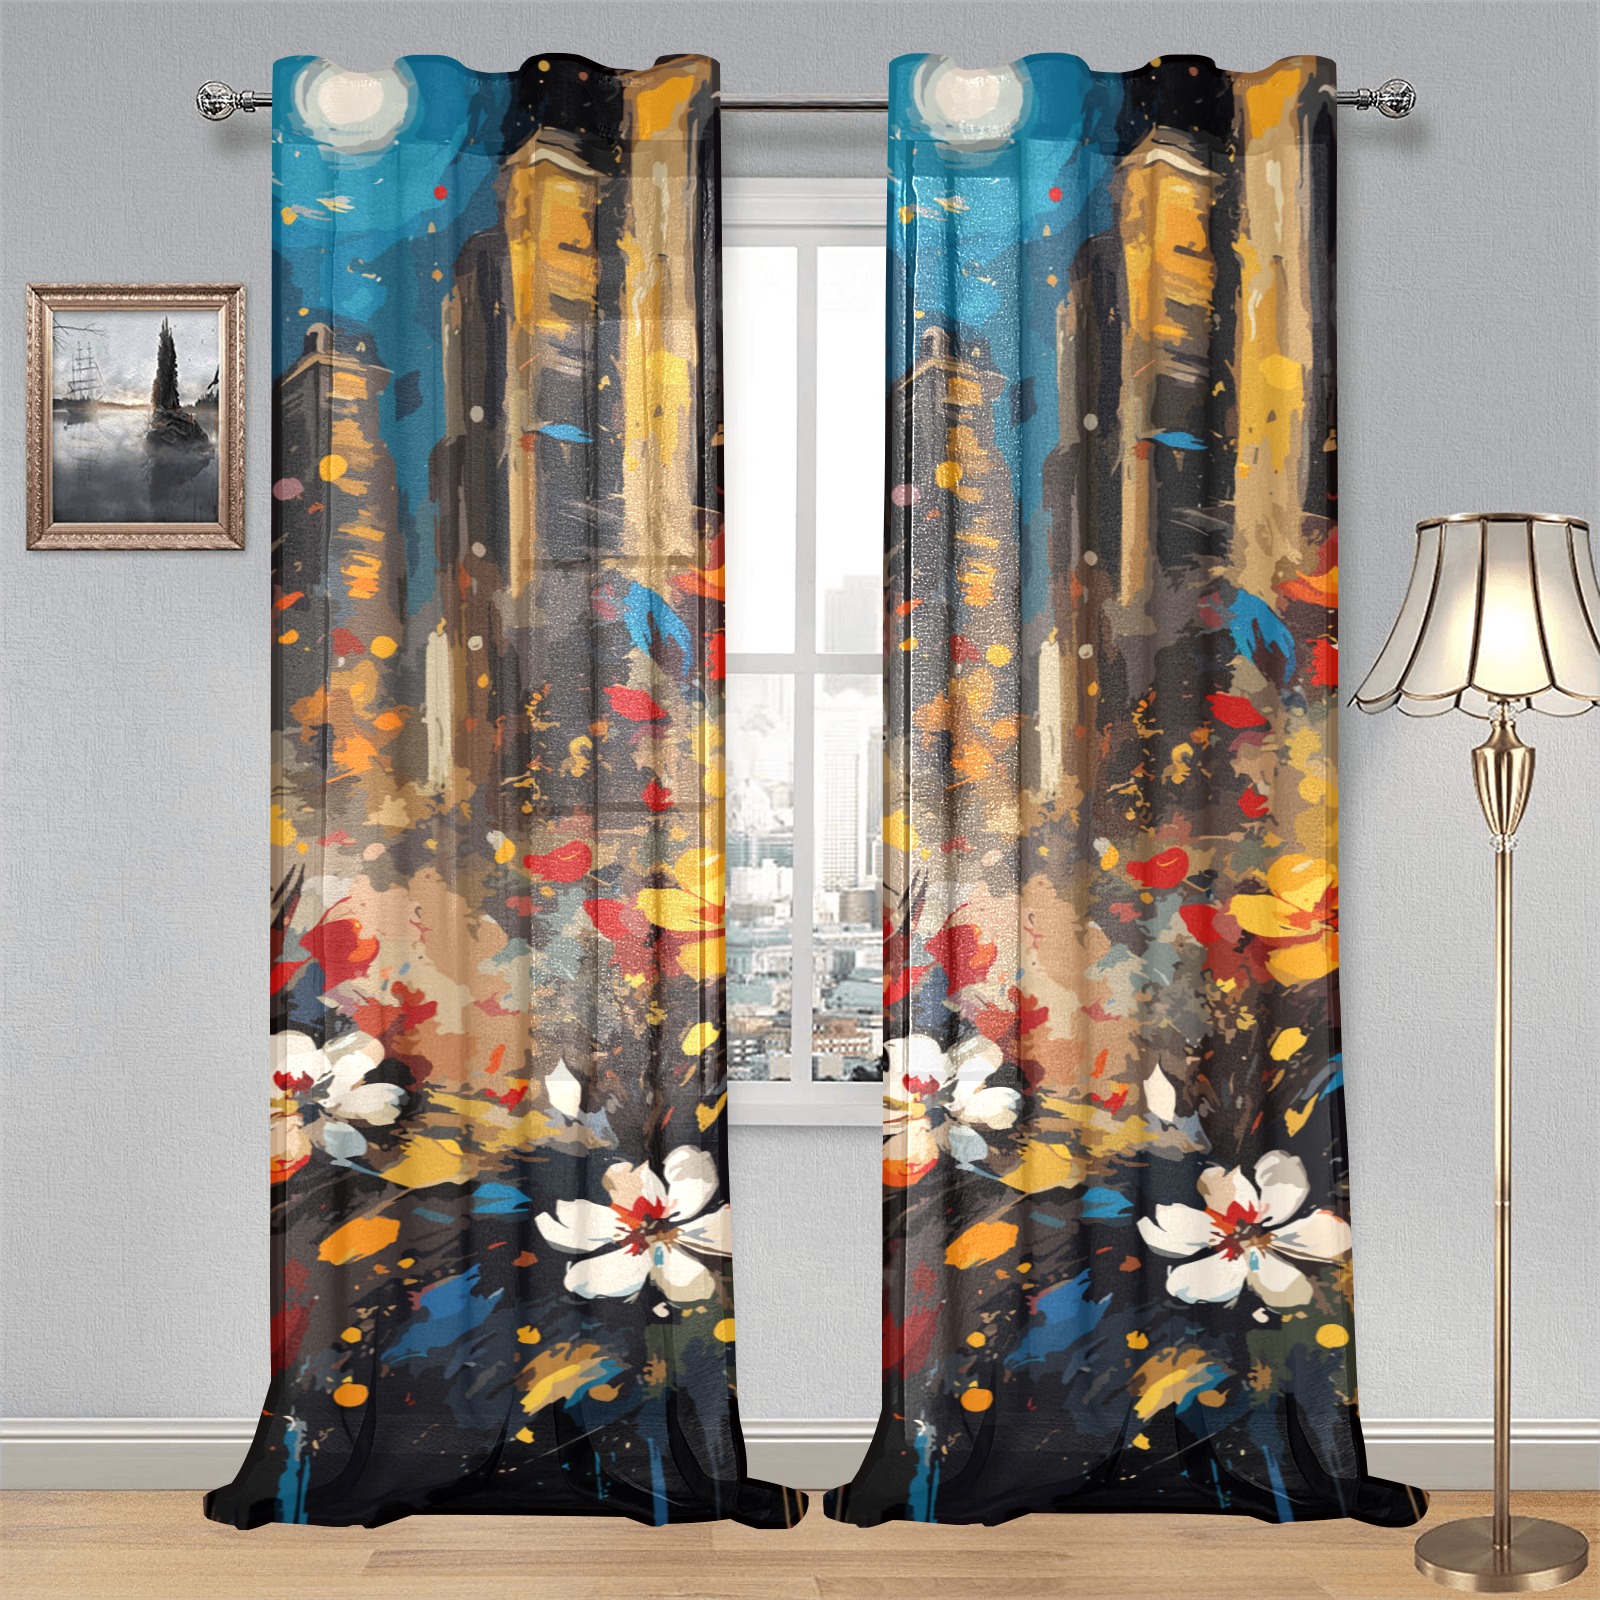 Urban floral theme. Skyscrapers, flowers at night Gauze Curtain 28"x95" (Two-Piece)